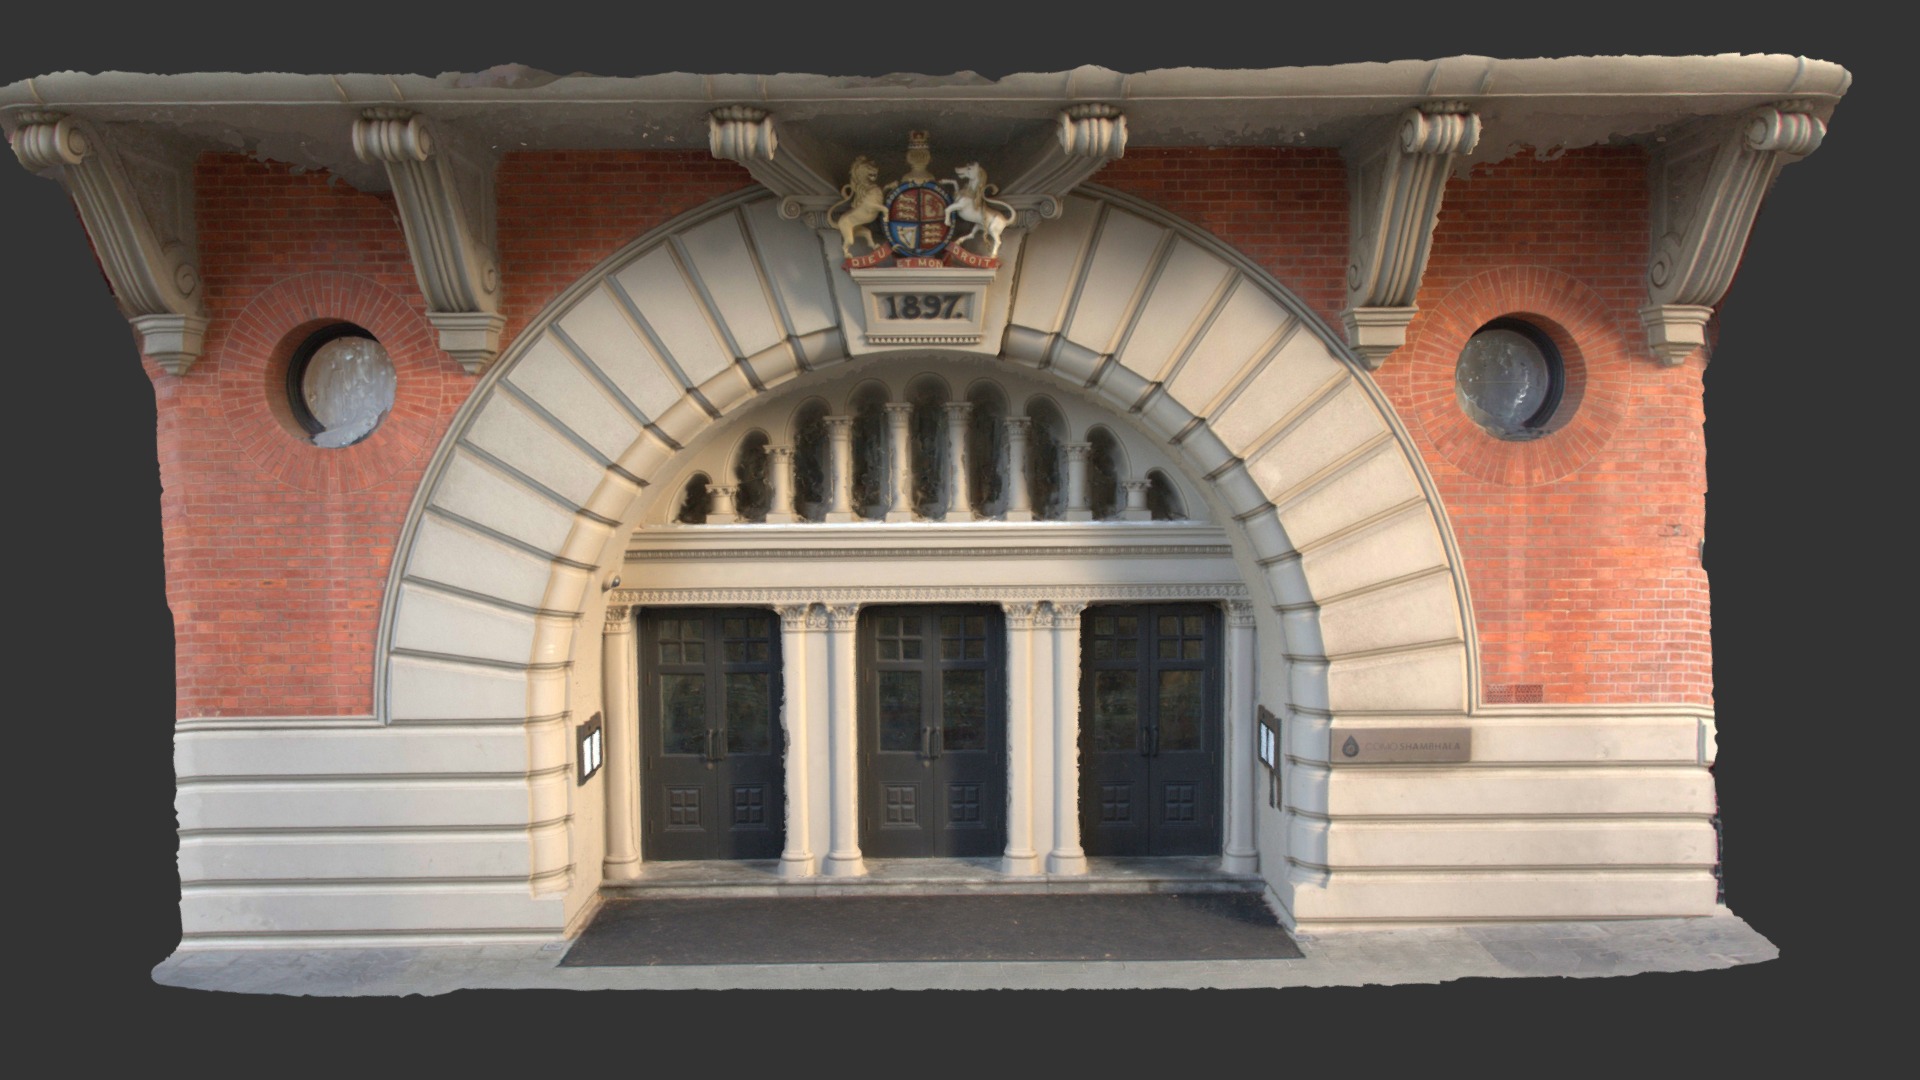 3D model Classic entrance – draft only - This is a 3D model of the Classic entrance - draft only. The 3D model is about a building with a large arched doorway.